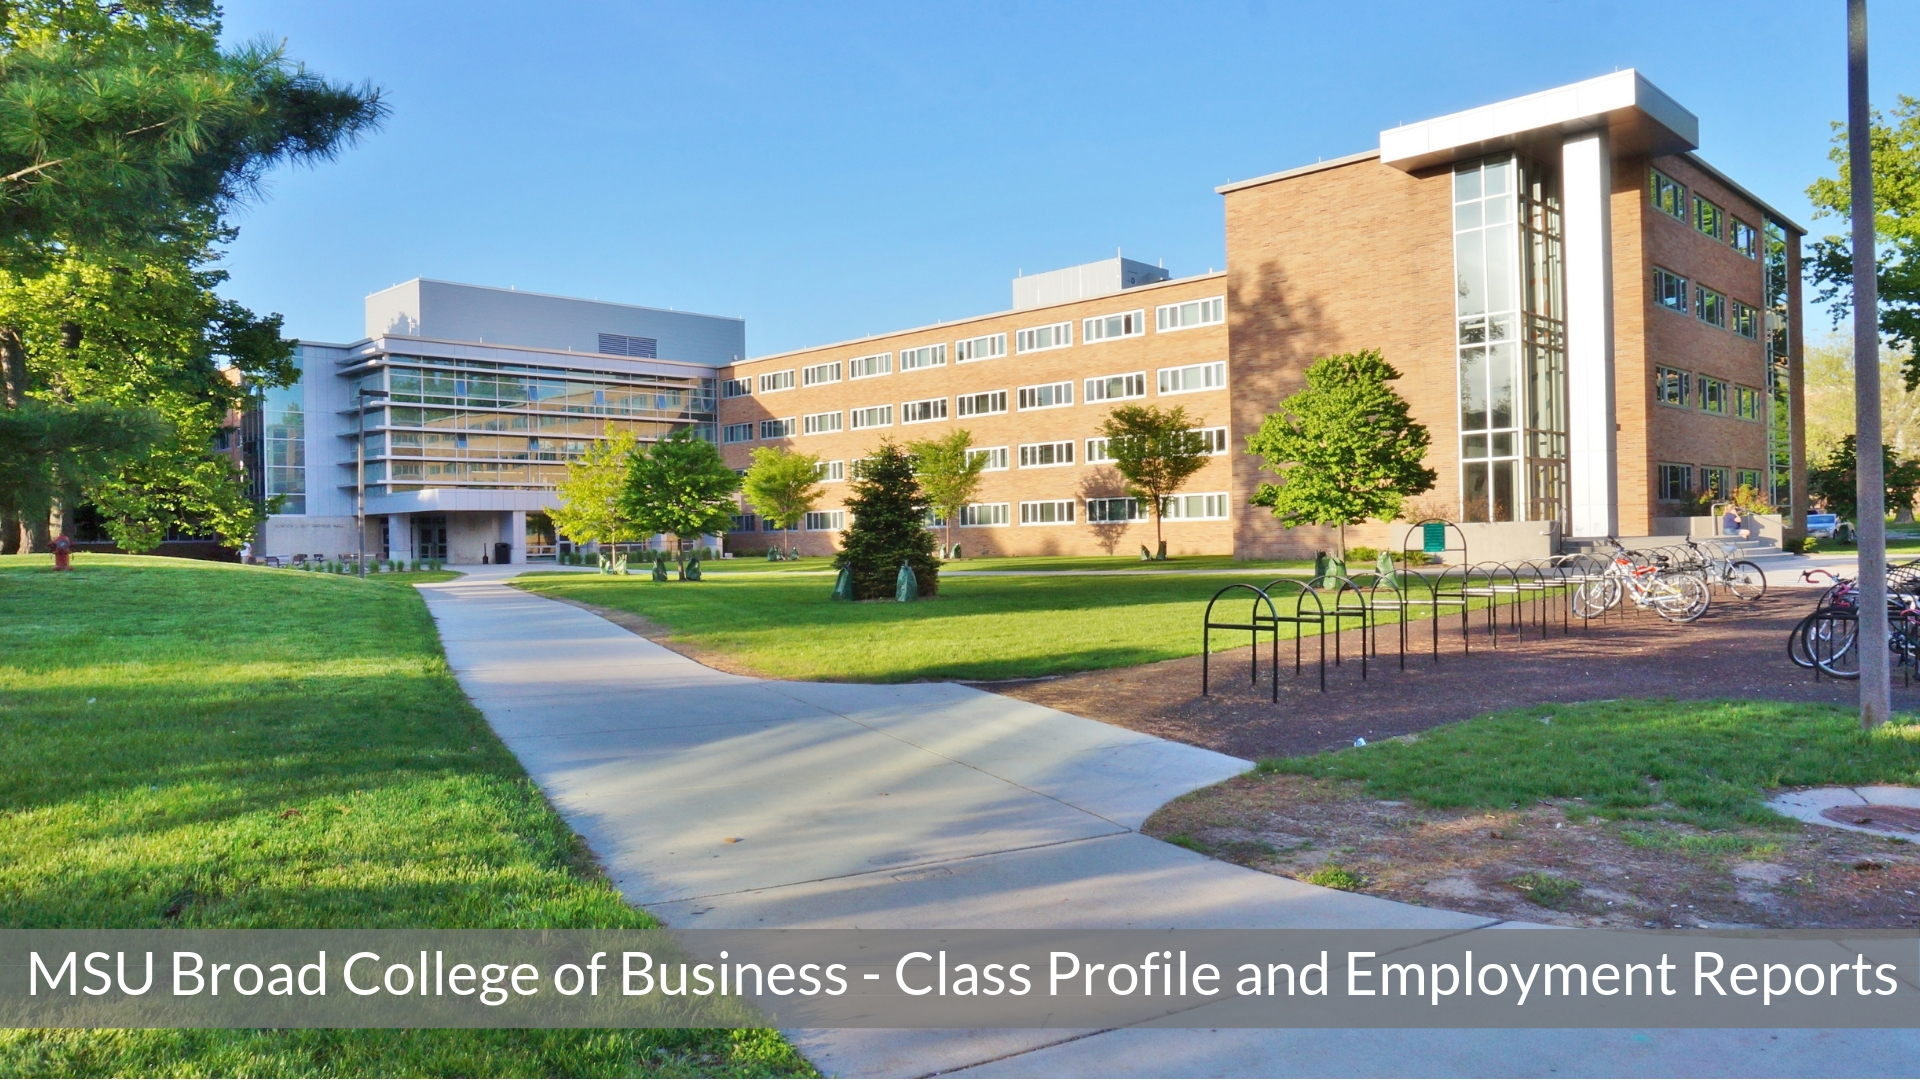 Broad College of Business - MSU MBA Program - Class Profile, Employment Reports and Notable Alumni - Broad School of Business